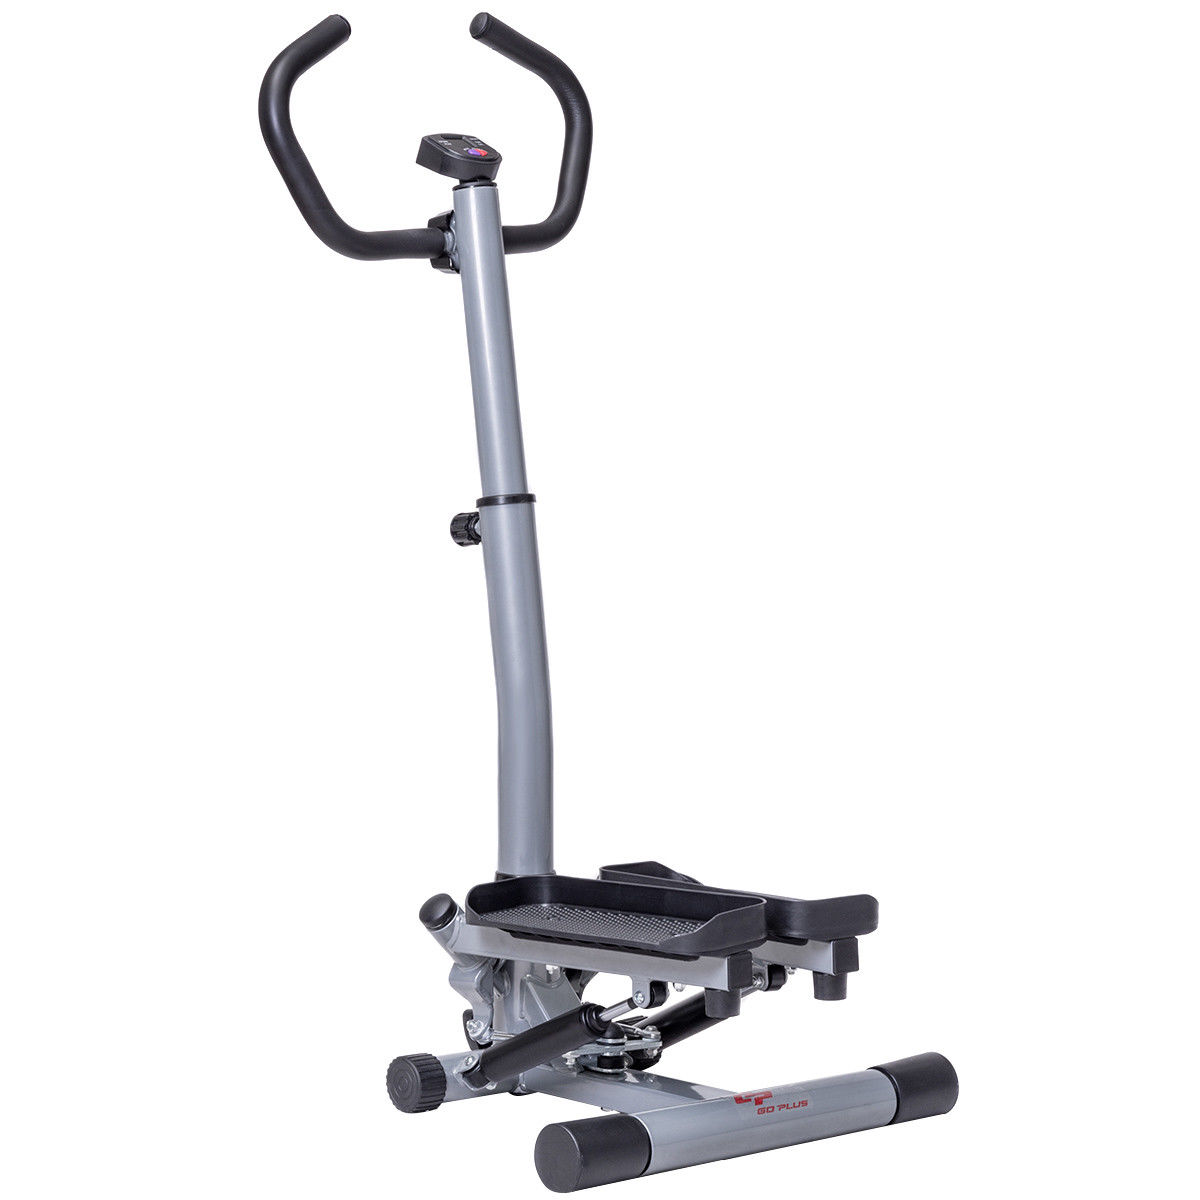 LCD Twist Stepper Body Workout Machine Aerobic Fitness Exercise With Handle Bar